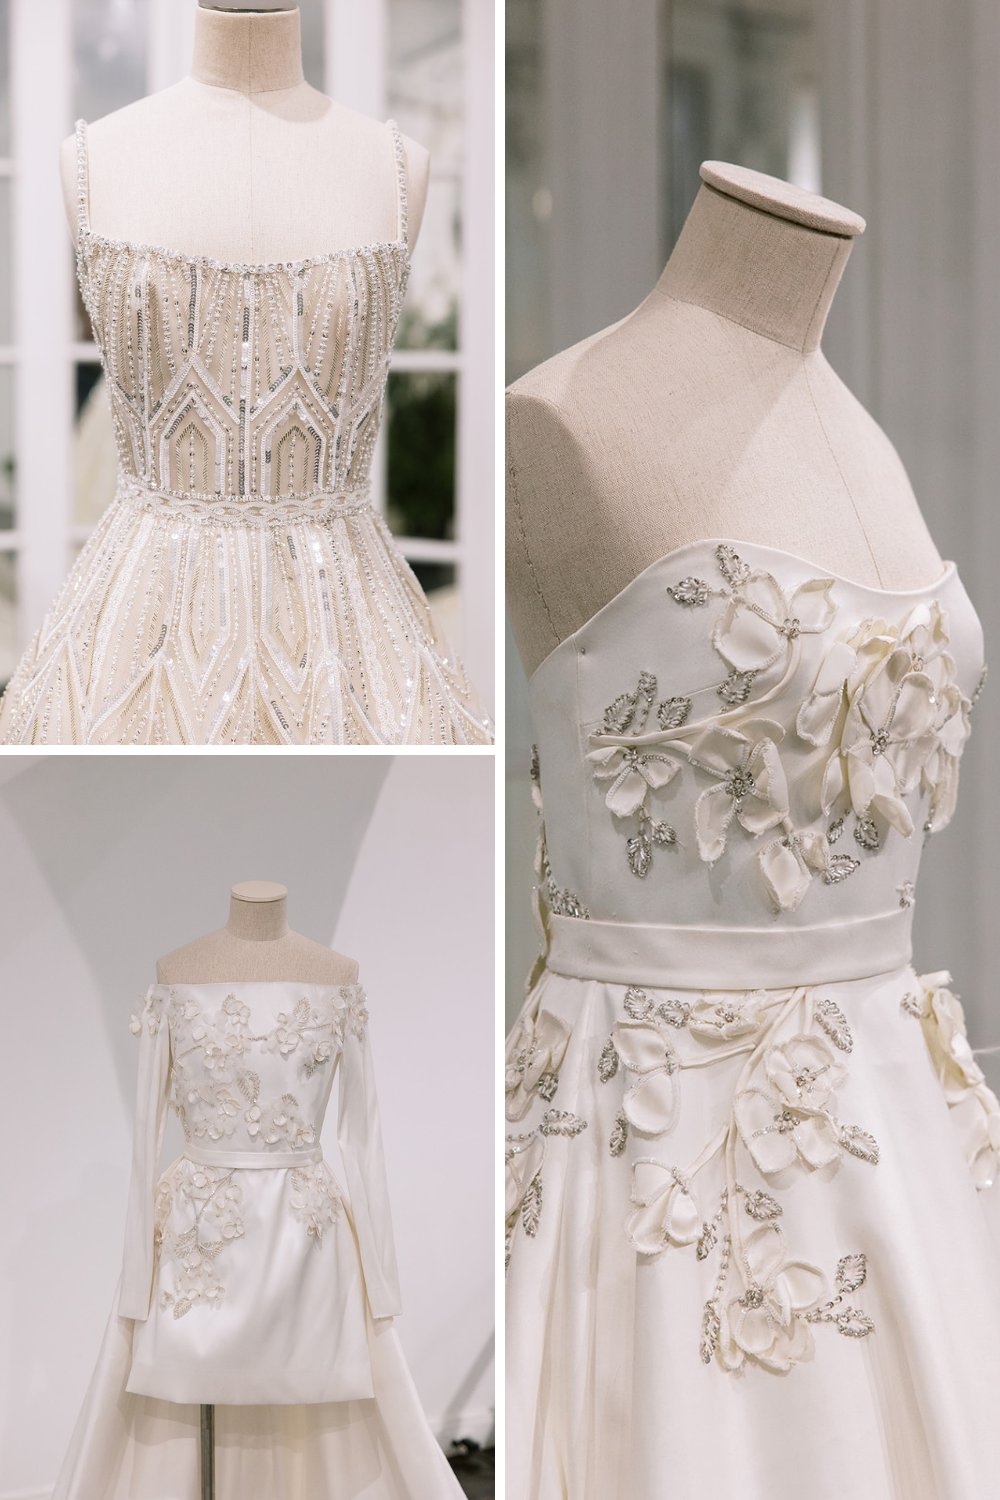 Collage of beaded and embellished wedding gown